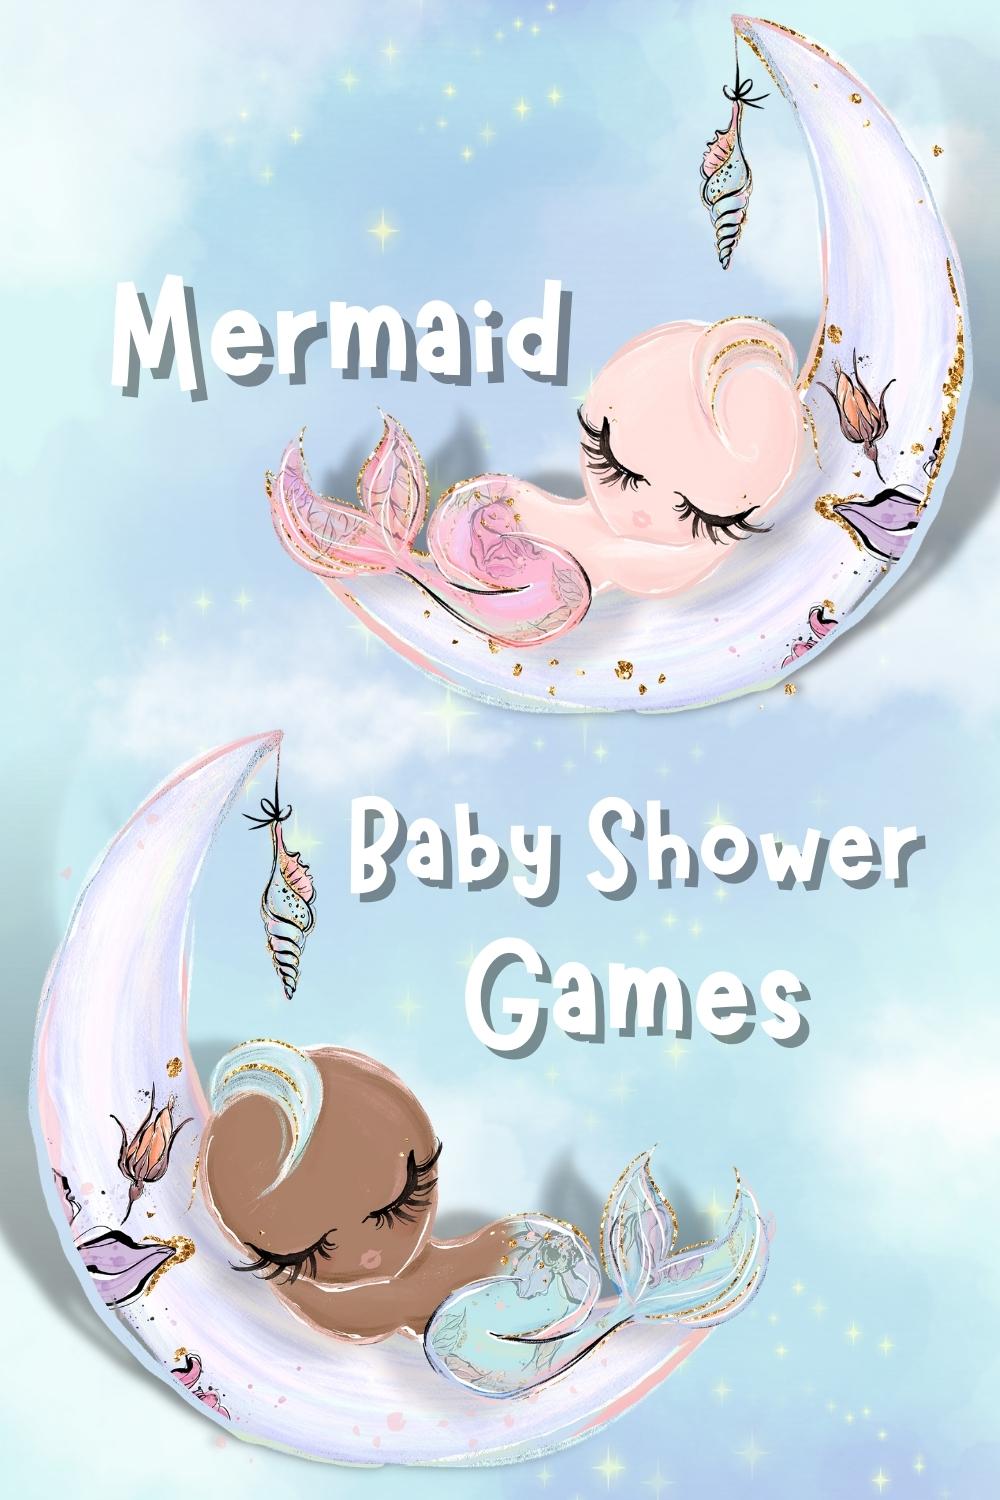 Fun mermaid baby shower games with word search, word match, and word scramble puzzles.